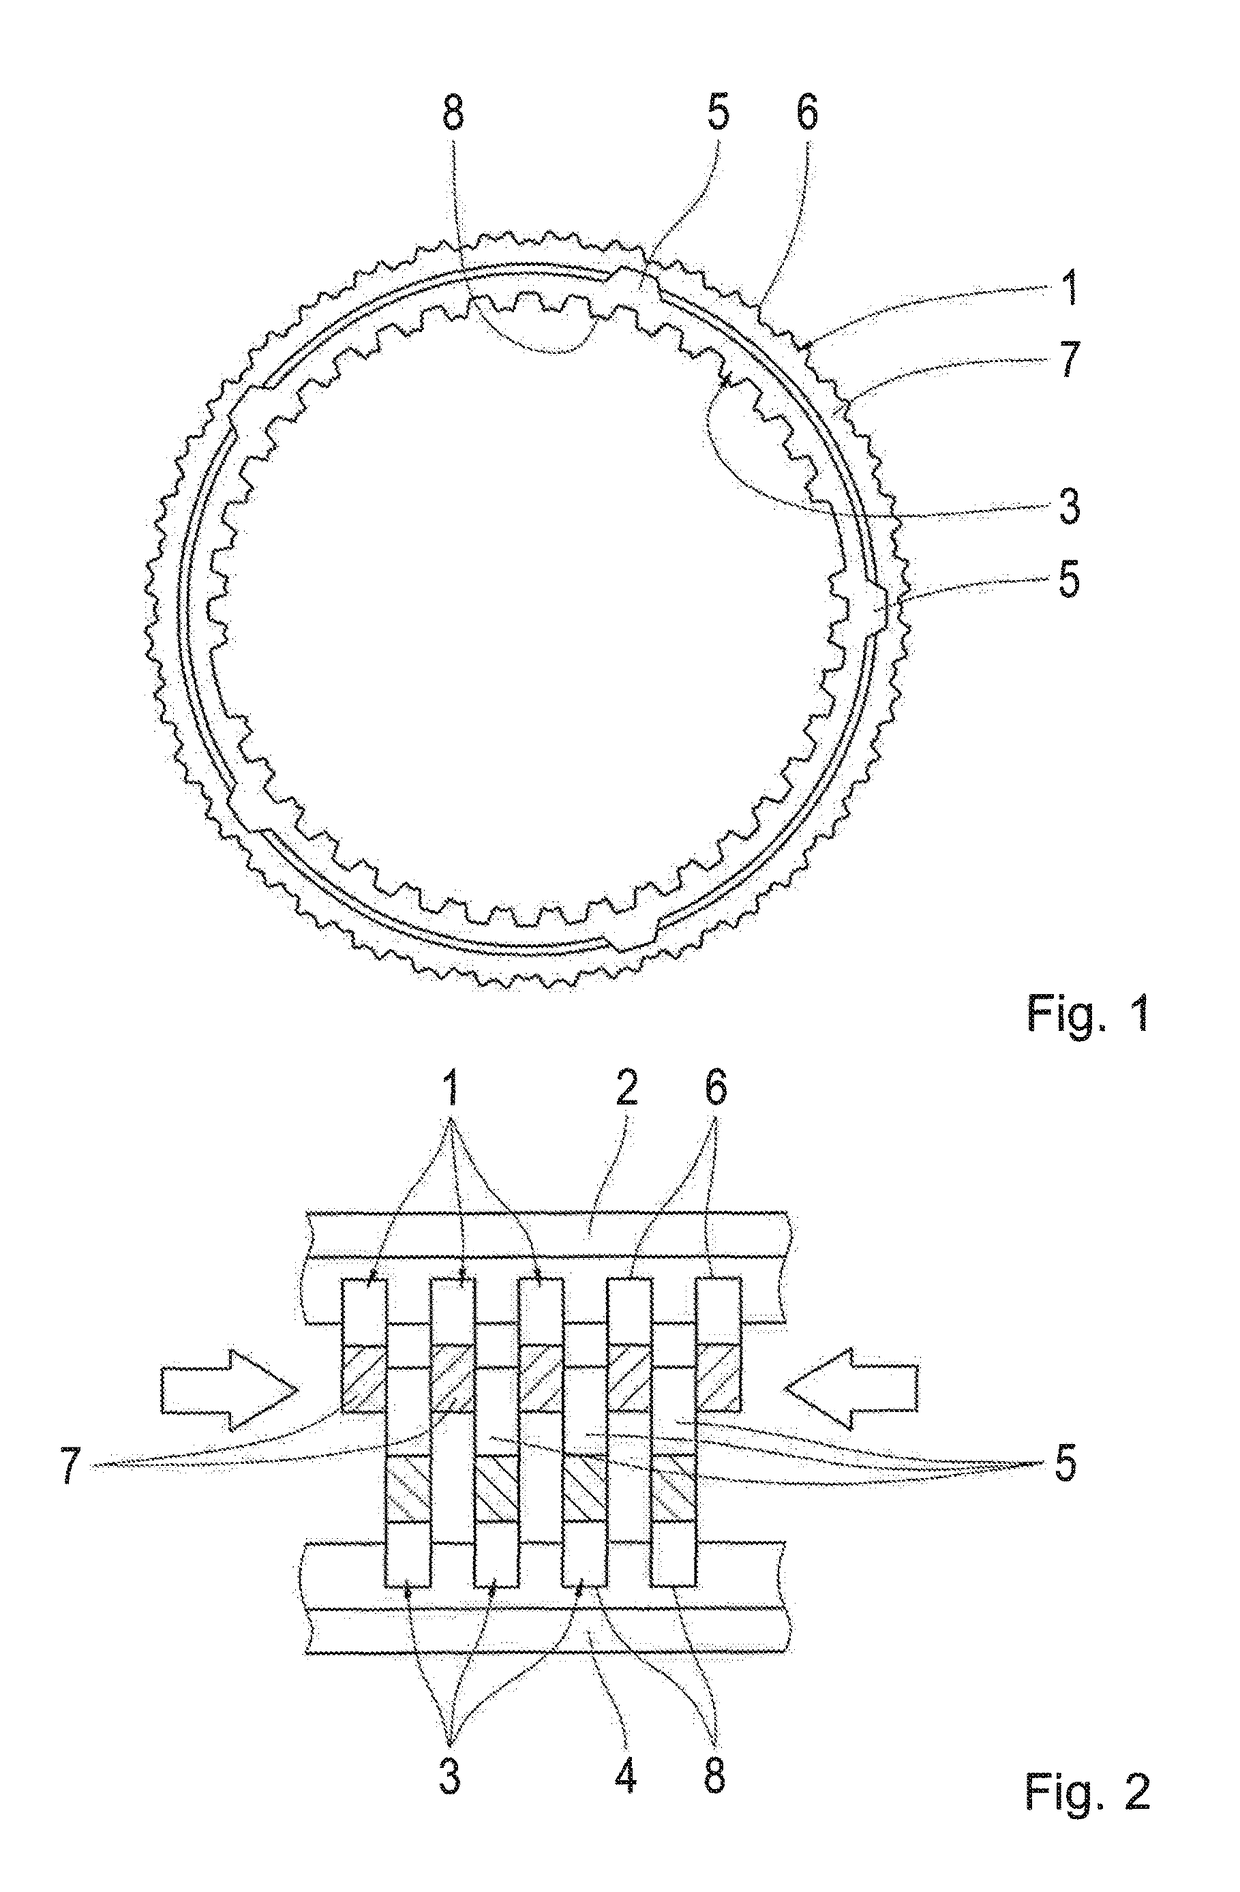 Frictional shifting element for a vehicle transmission